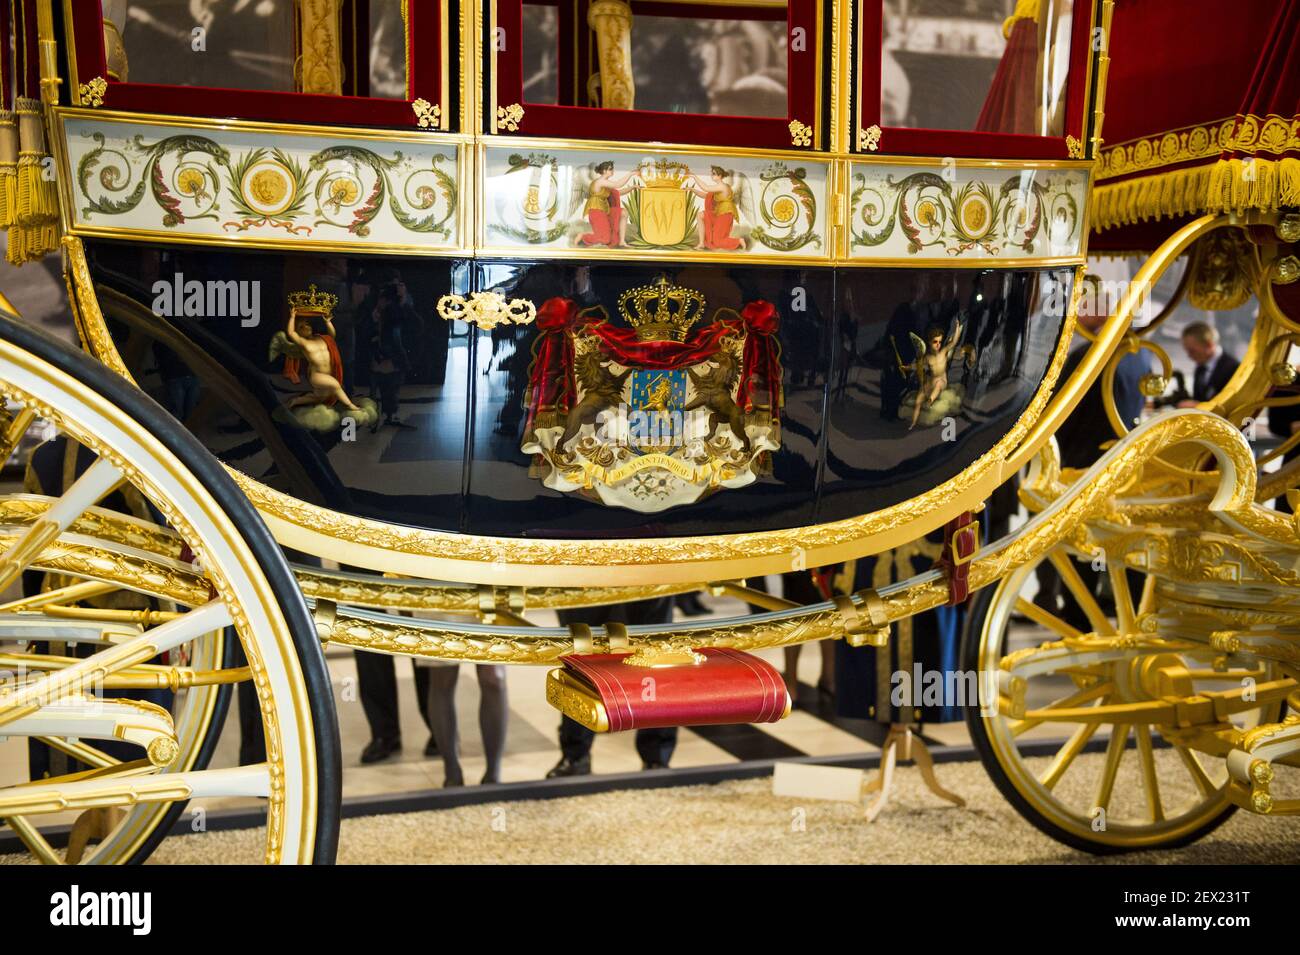 King Willem-Alexander of the Netherlands looks at the Louwman Museum's  restored glass coach glazen koets in The Hague, Netherlands on March 16,  2015. The special carriage, the oldest of the royal stable